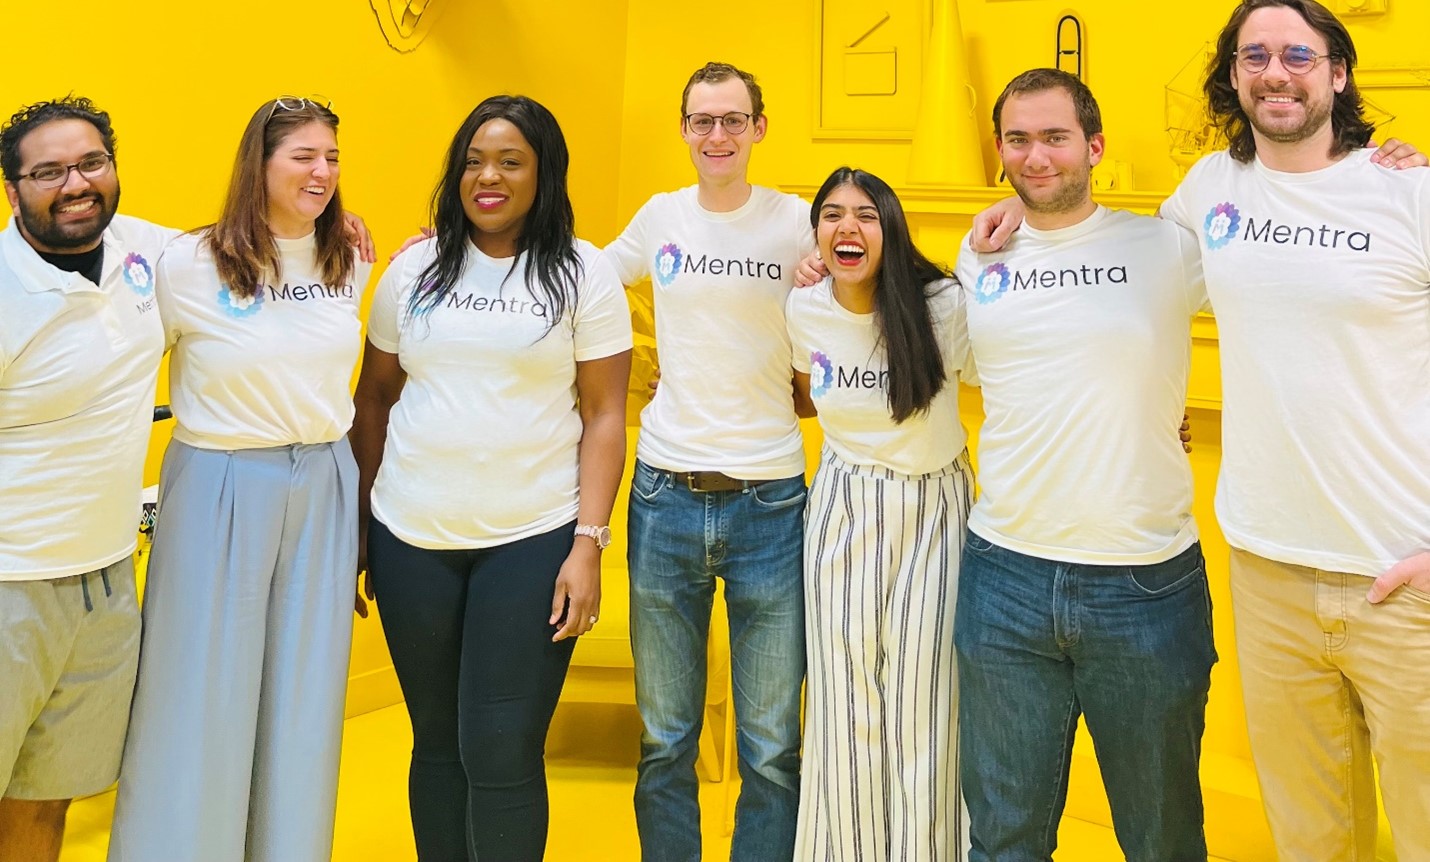 7 of the Mentra team members in a yellow colorful room smiling 